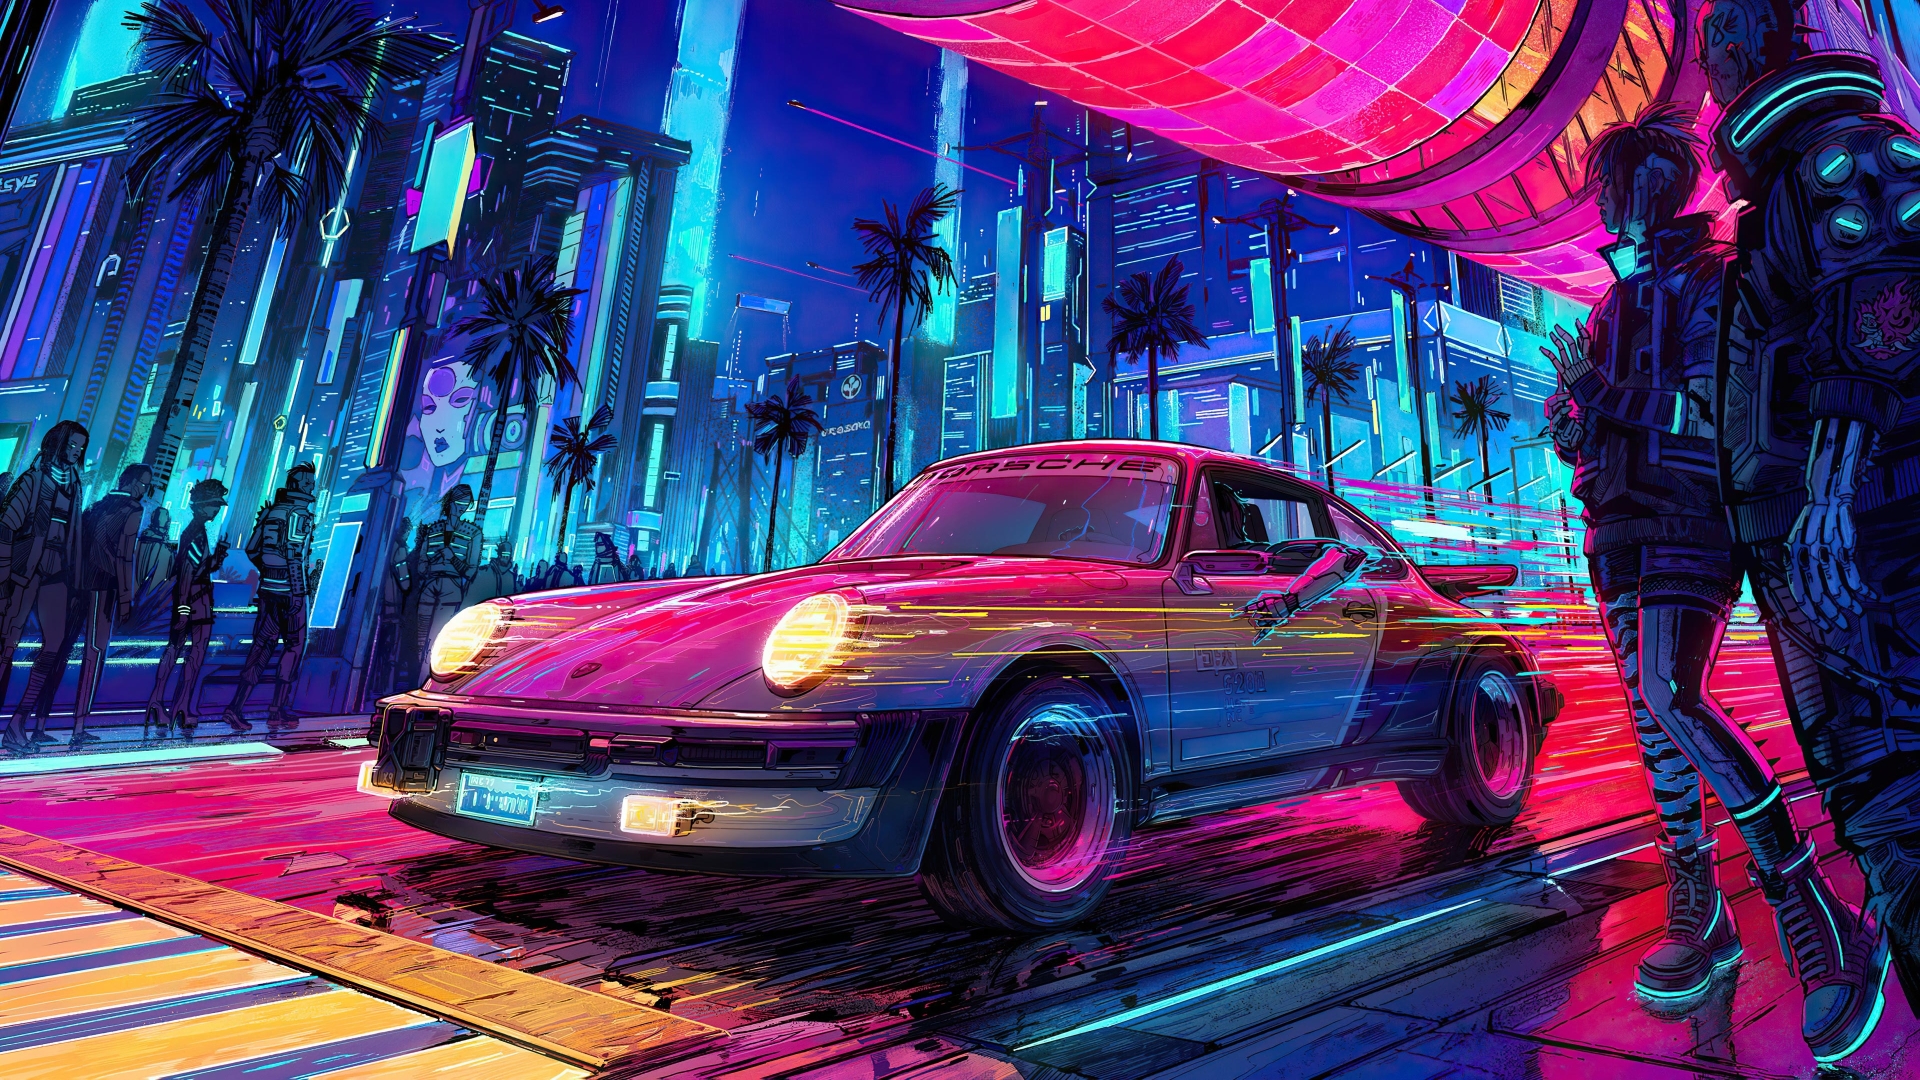 Free download Cyberpunk Wallpapers on [1920x1080] for your Desktop